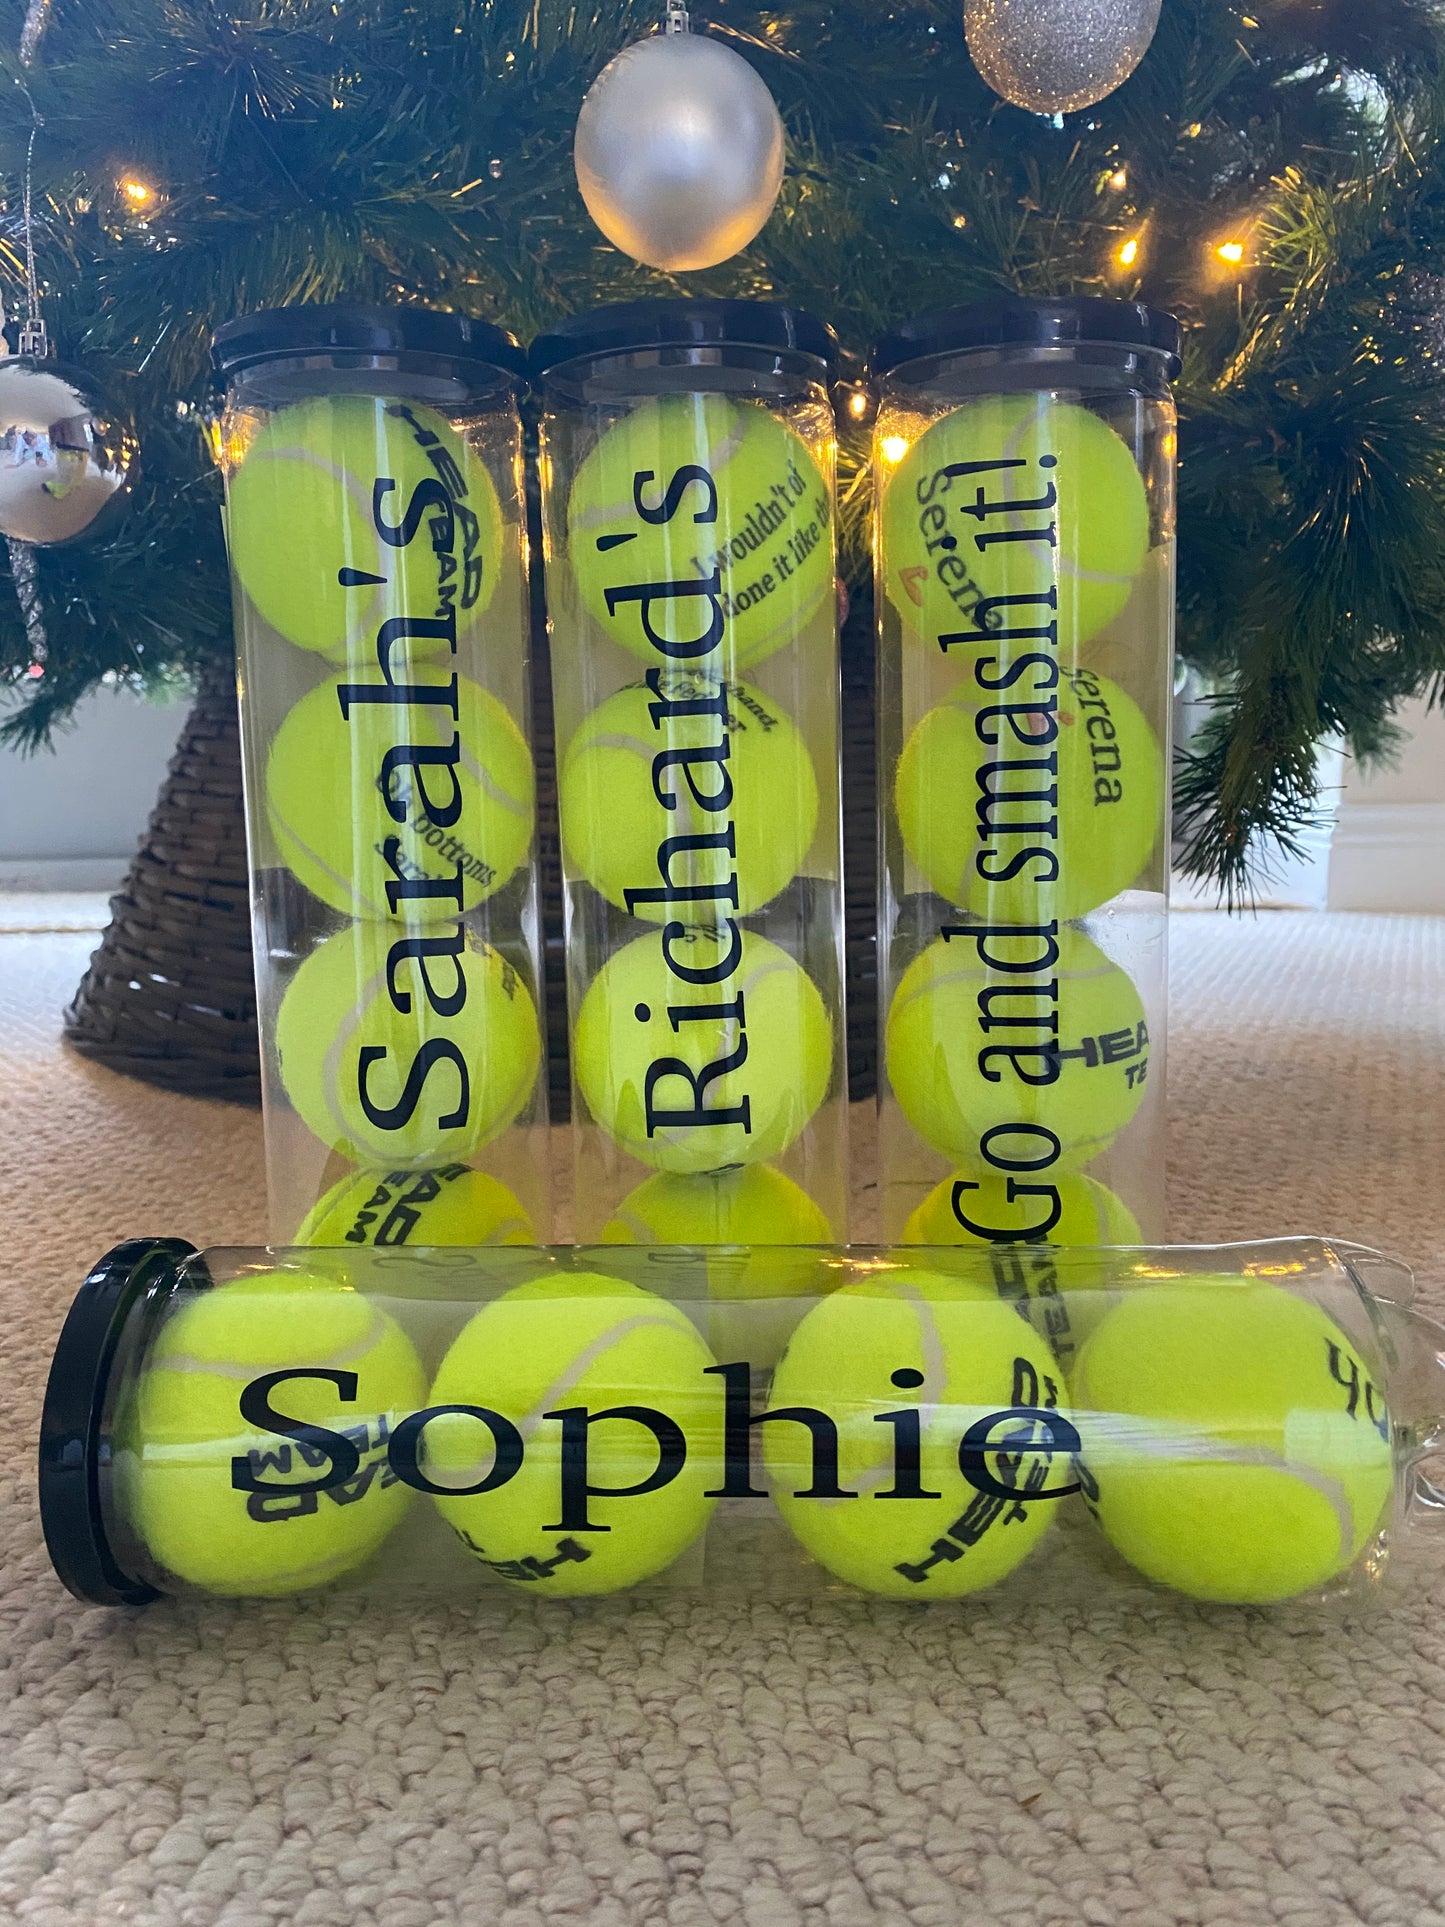 NTB - Personalised Adult Tennis Balls - Double Racket